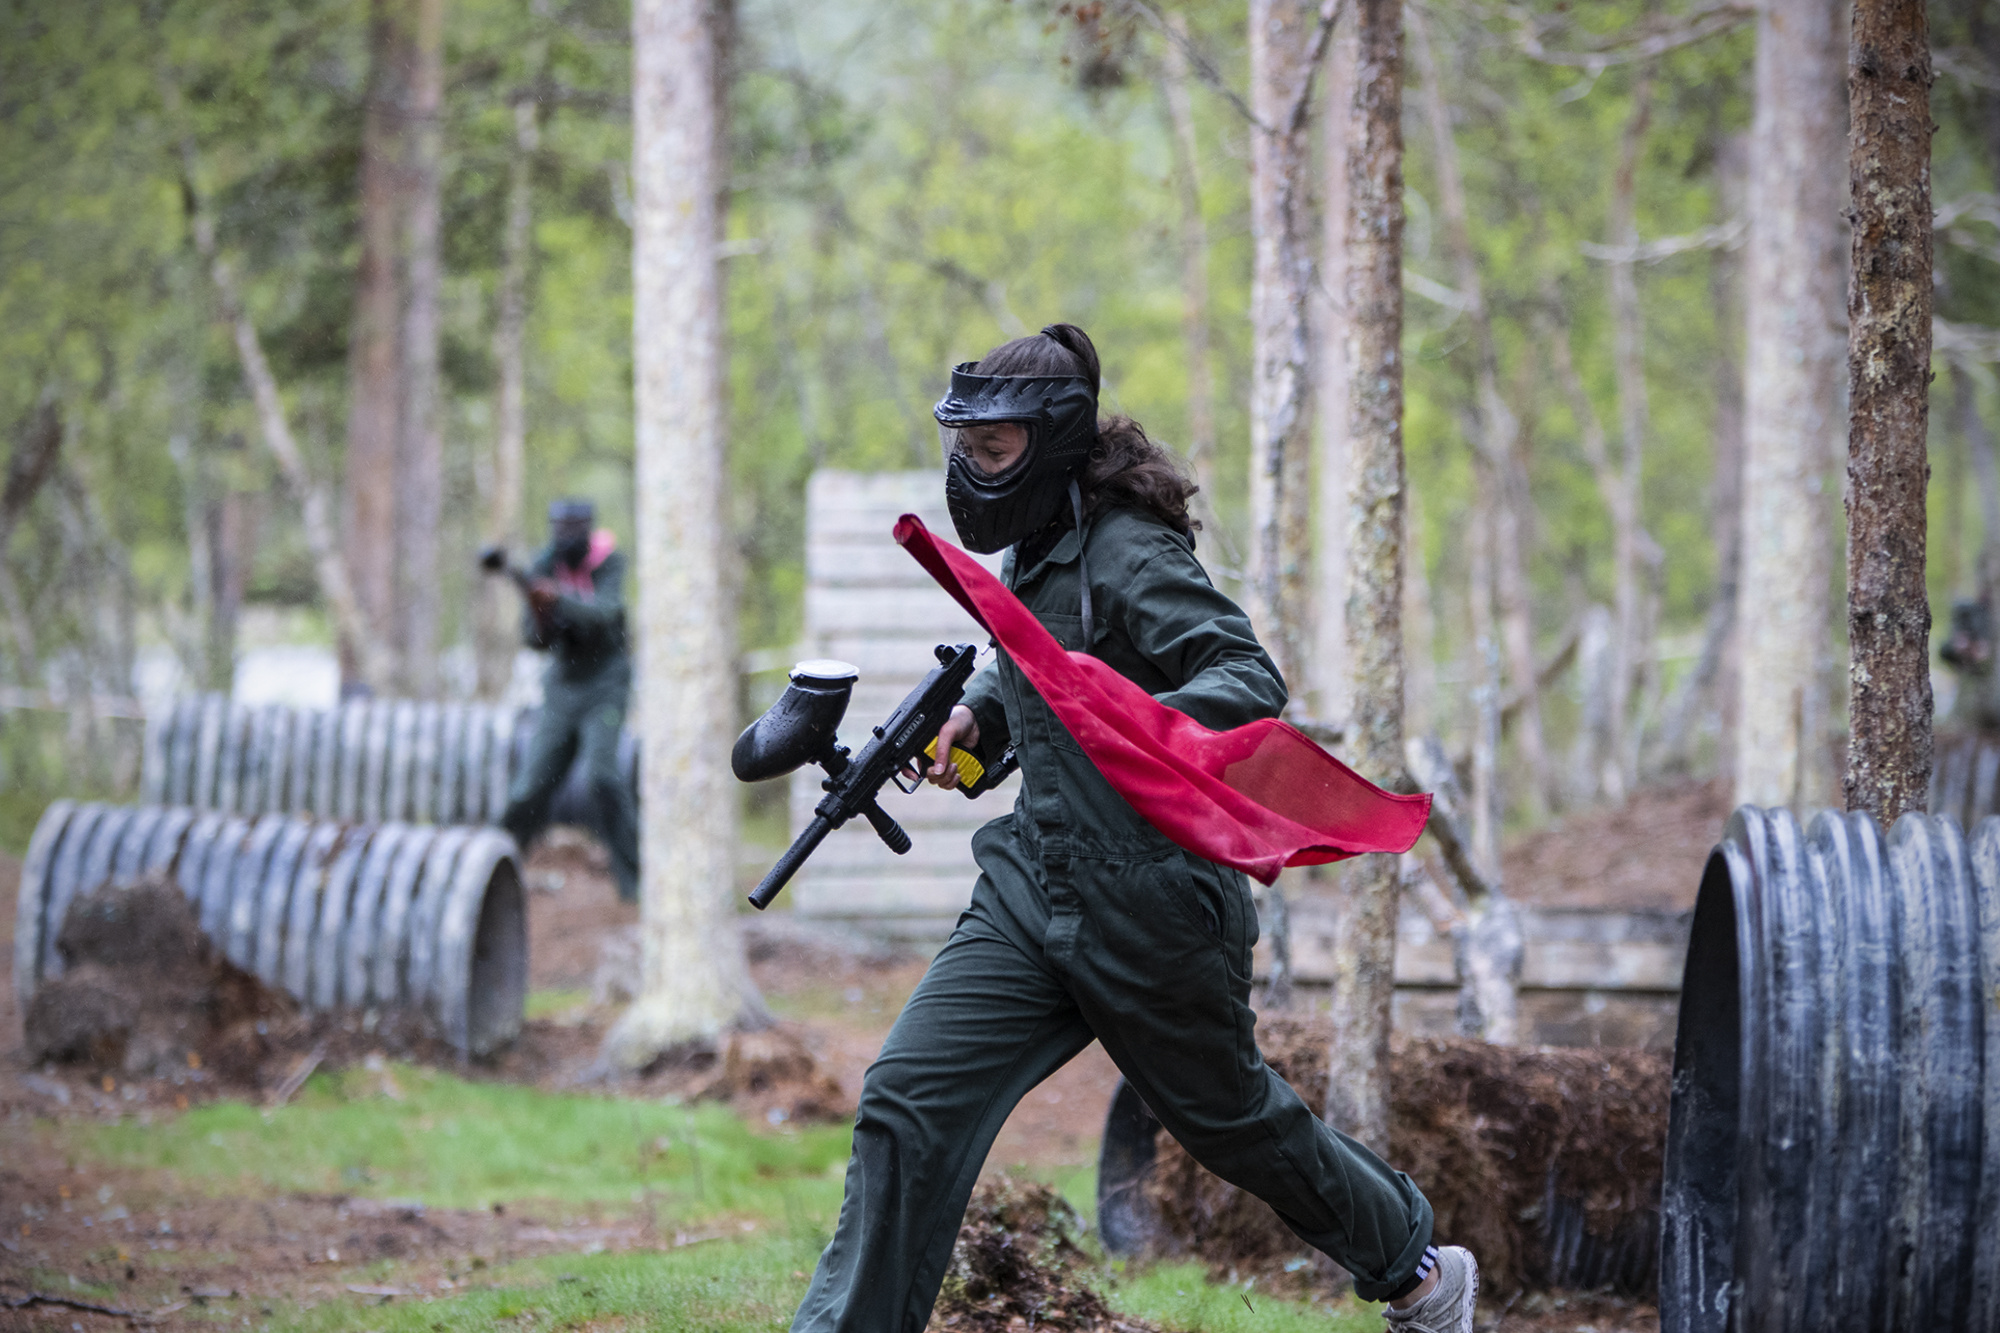 Paintball: Capture the flag - a team combat sport in which players try to get the opponent's flag. 2000x1340 HD Wallpaper.